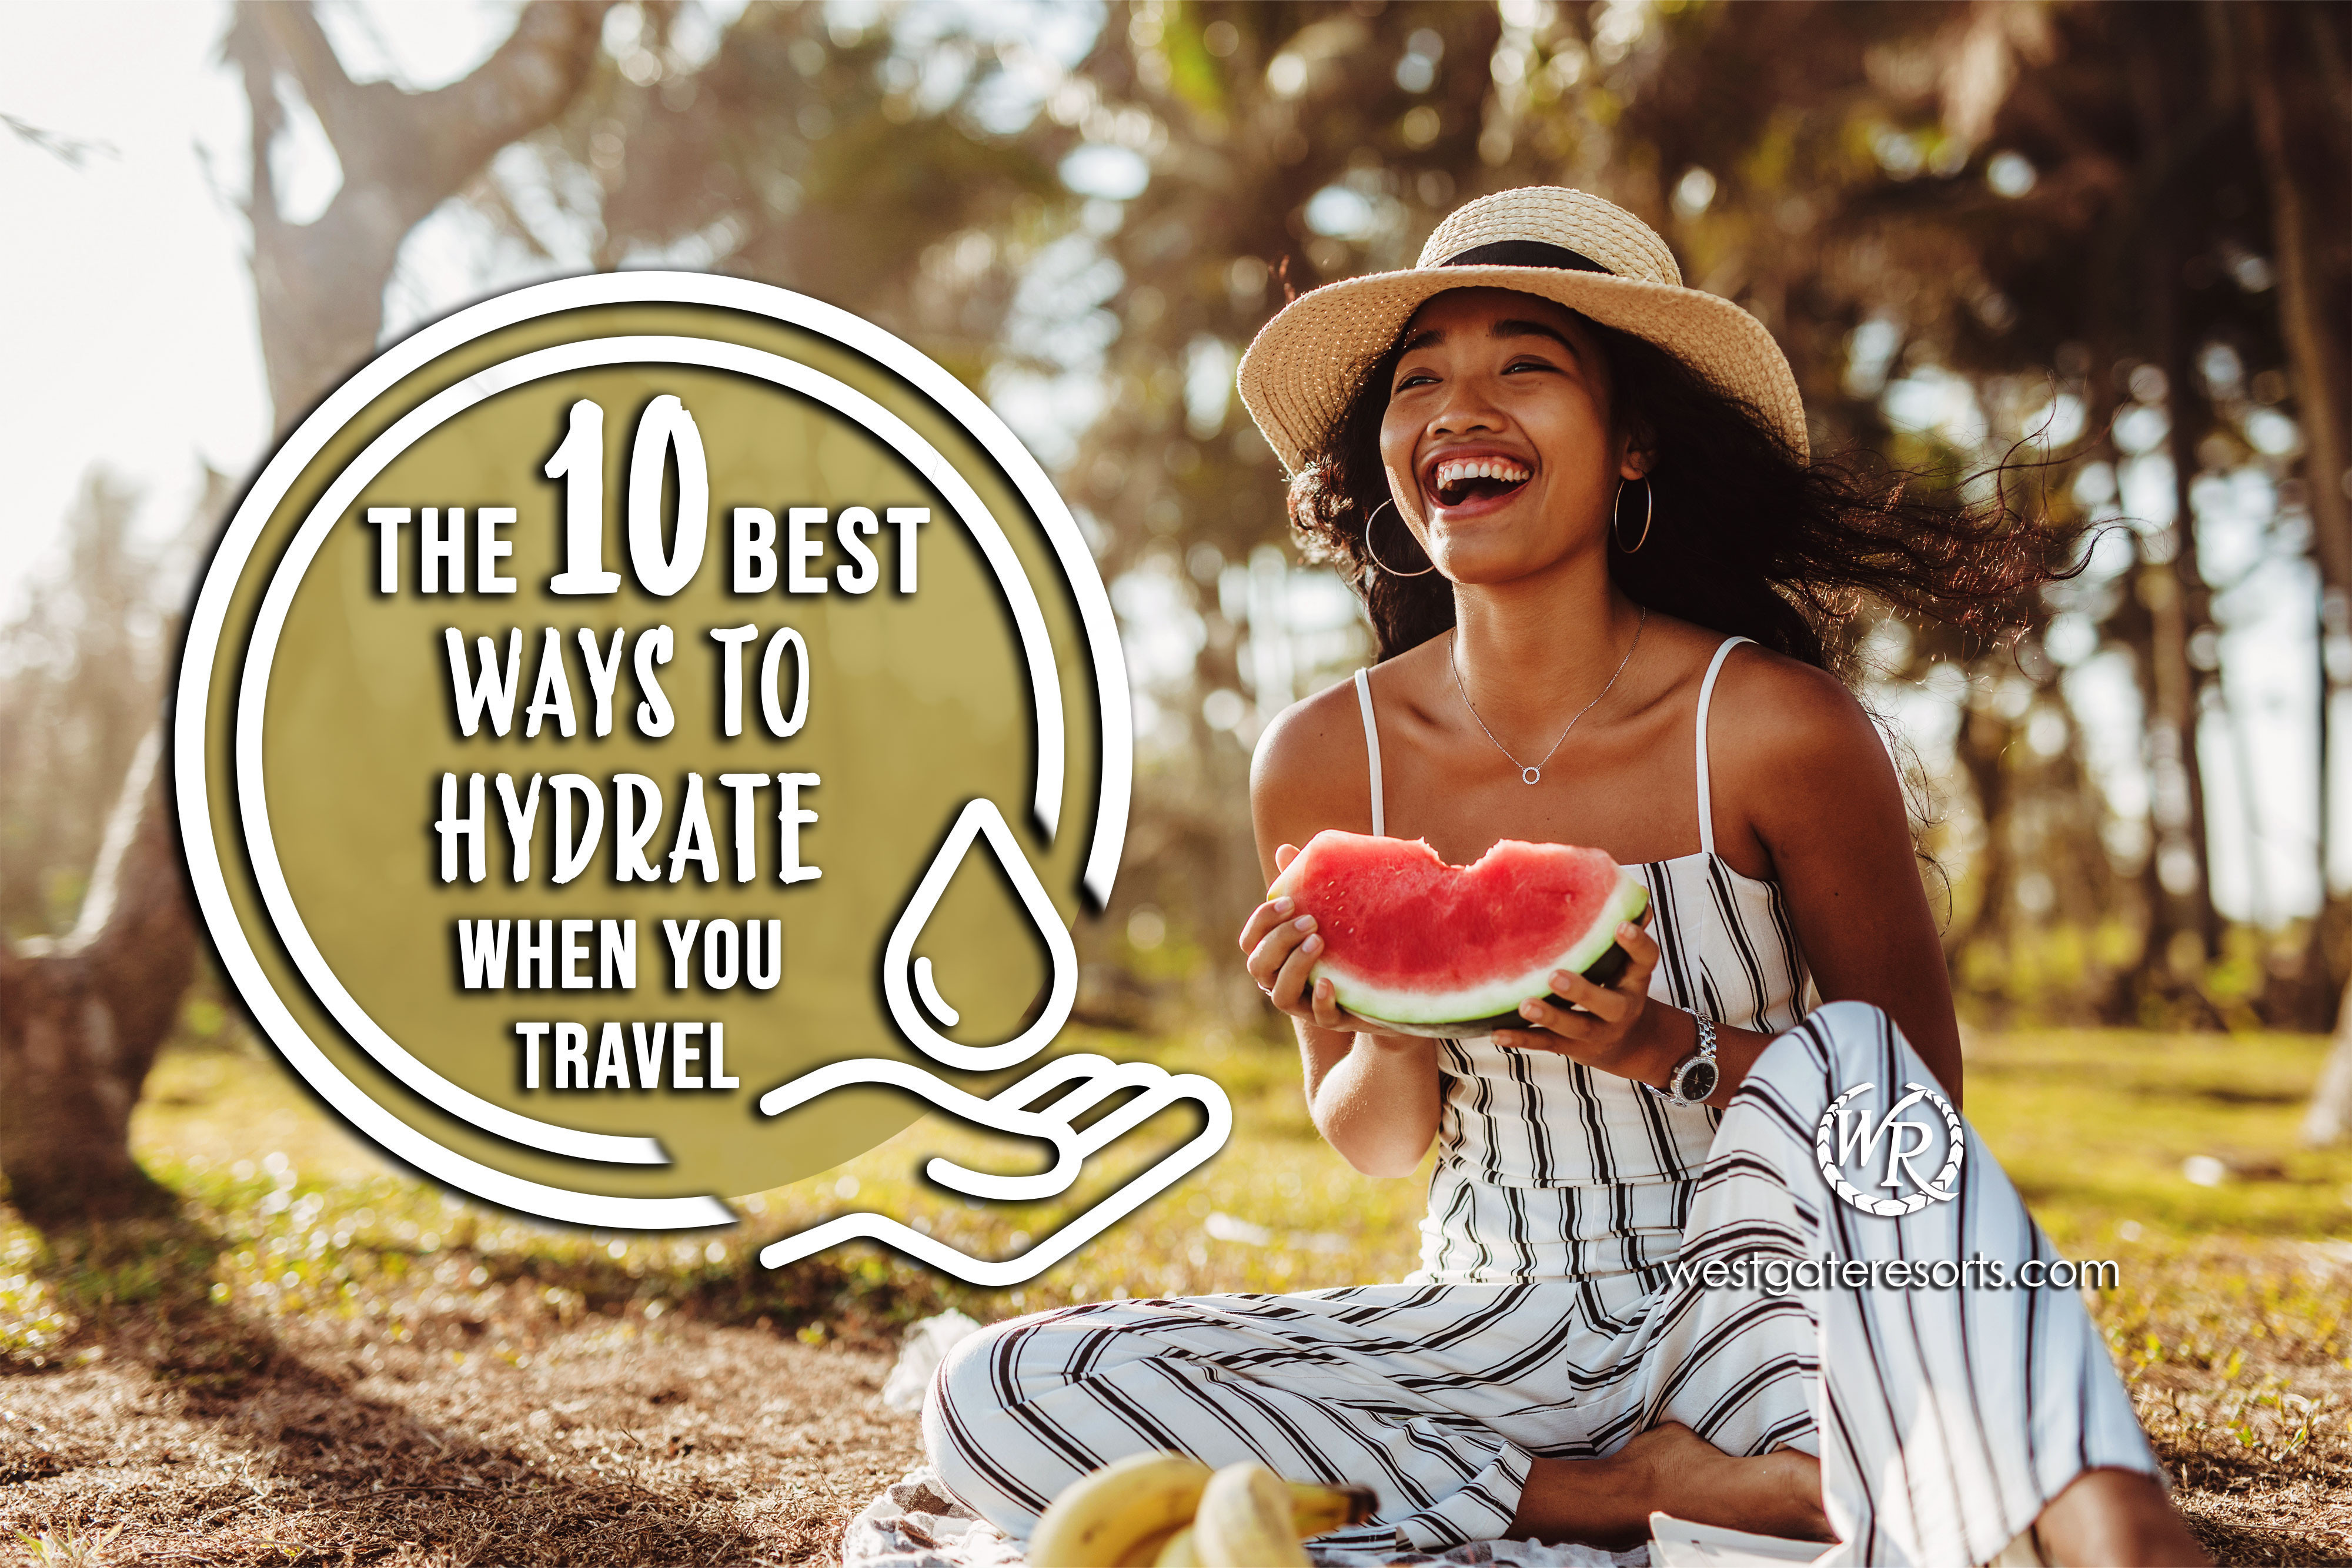 The 10 Best Ways To Hydrate When You Travel